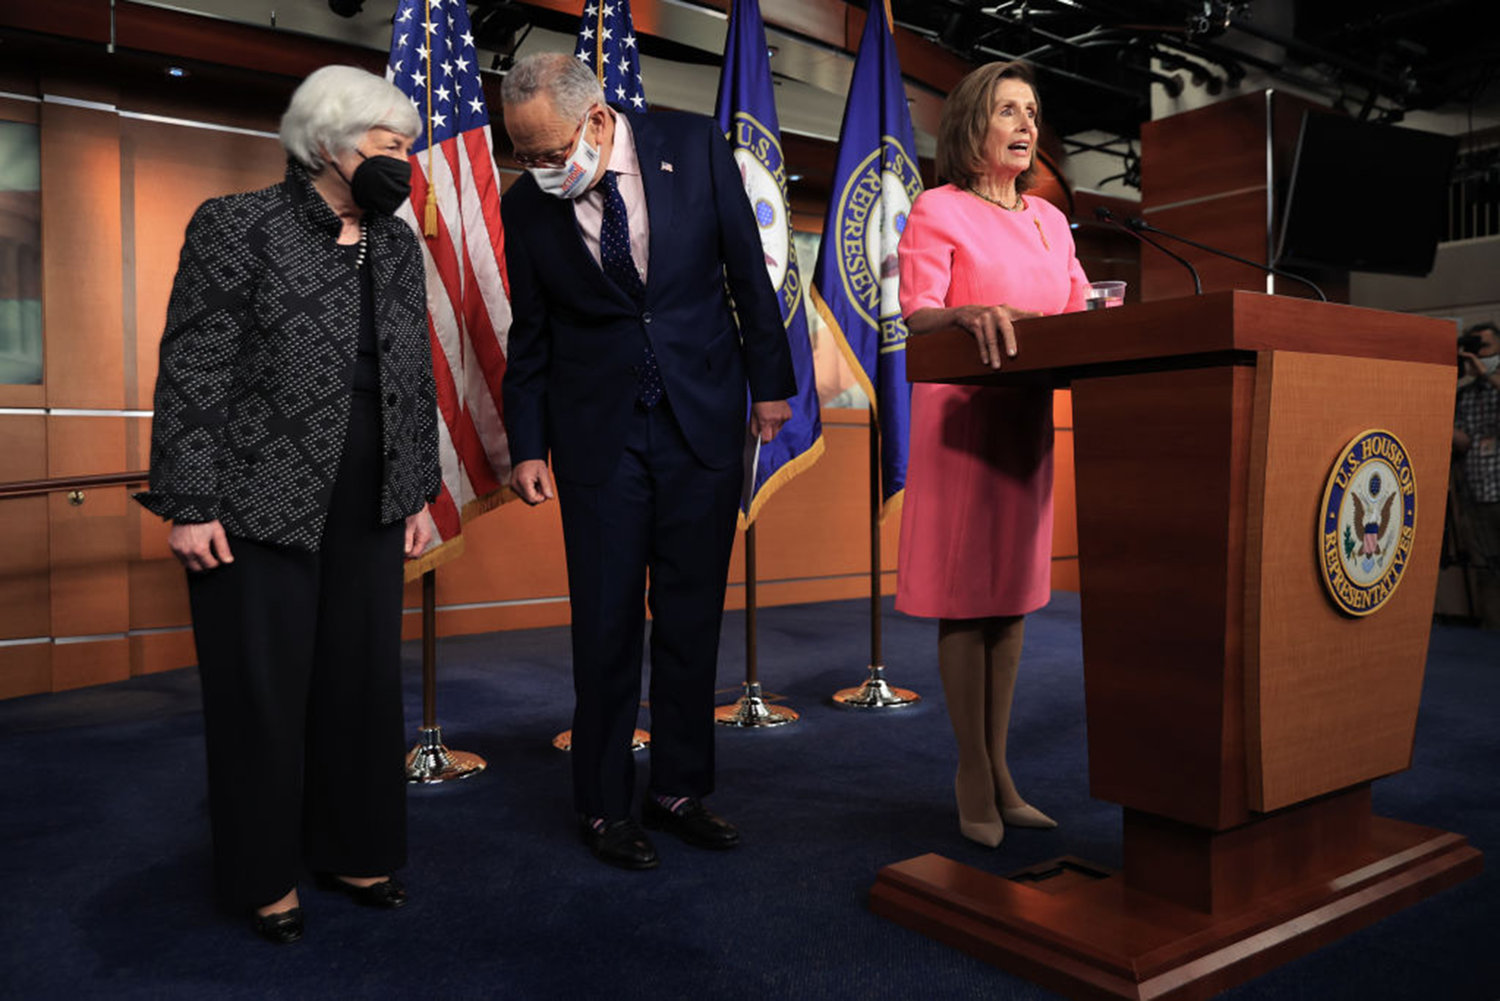 From left to right: Treasury Secretary Janet Yellen briefly joins Senate Majority Leader Charles Schumer, D-N.Y., and Speaker of the House Nancy Pelosi, D-Calif., during a news conference at the U.S. Capitol on Sept. 23, 2021, in Washington, D.C. Pelosi, Senate Majority Leader Charles Schumer and moderate and progressive congressional Democrats met with President Joe Biden at the White House last Wednesday in an attempt to hammer out a deal on infrastructure and budget legislation. (Chip Somodevilla/Getty Images/TNS)